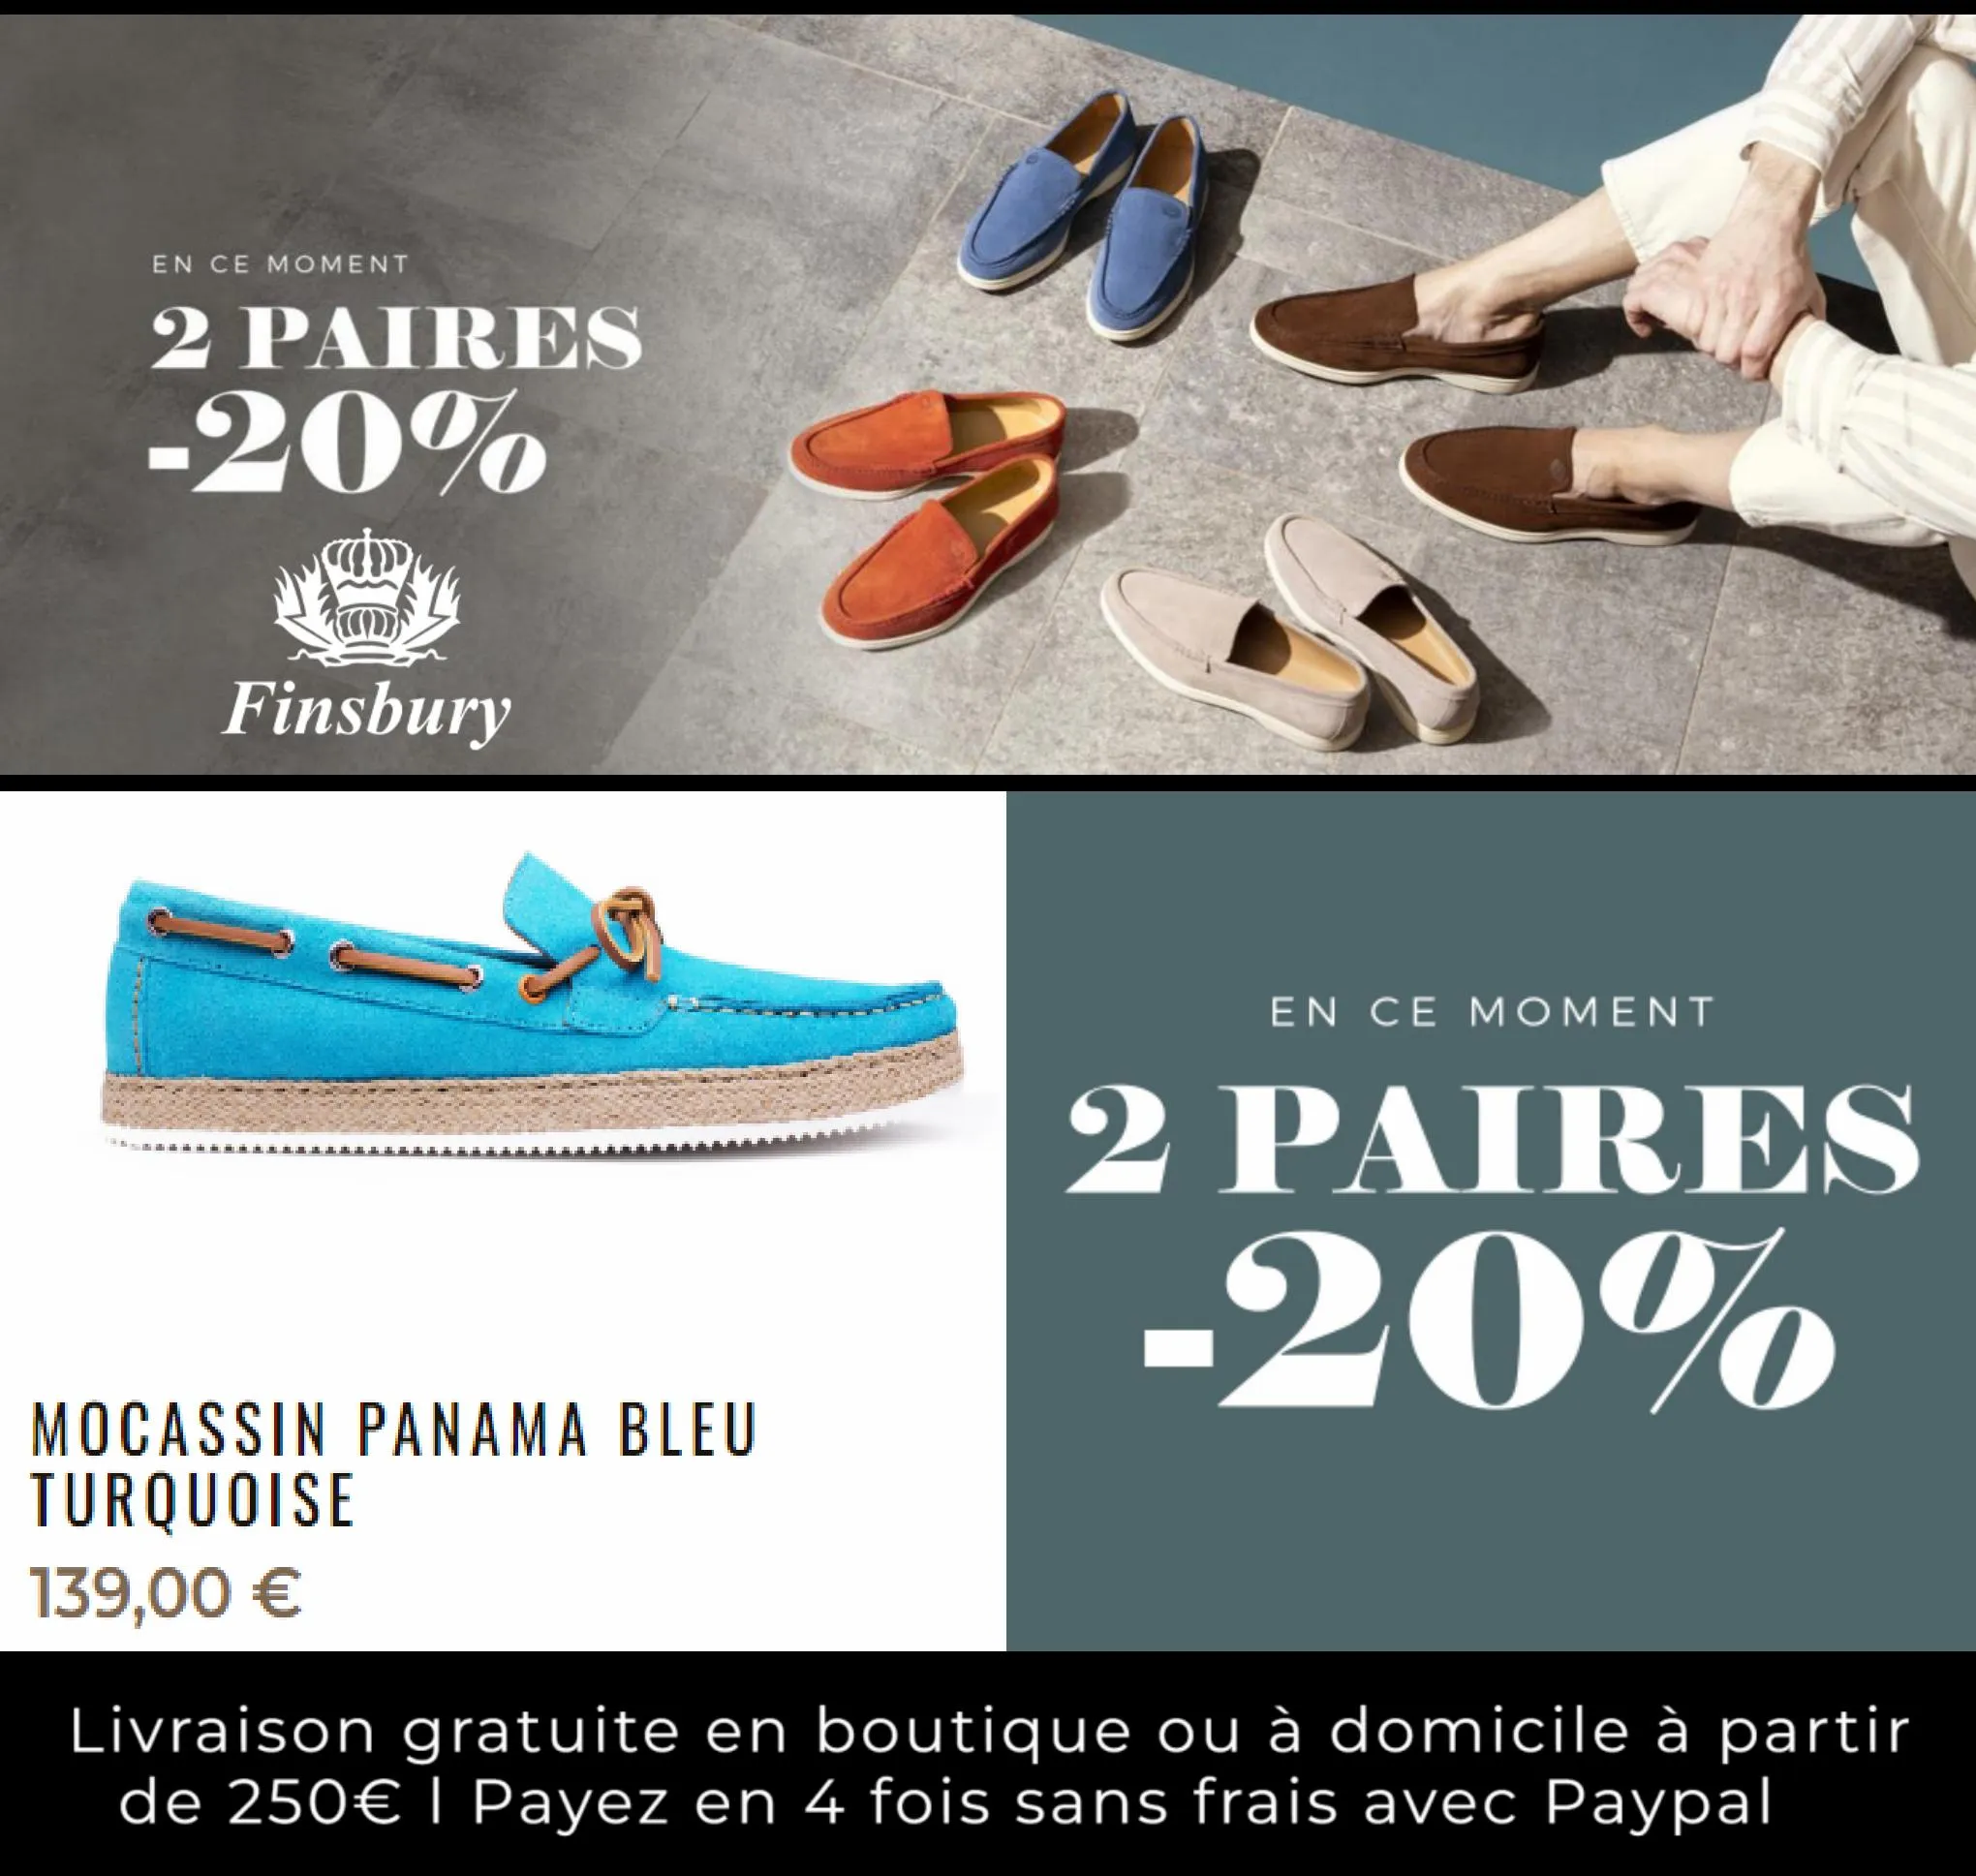 Catalogue 2 Paires -20%, page 00001